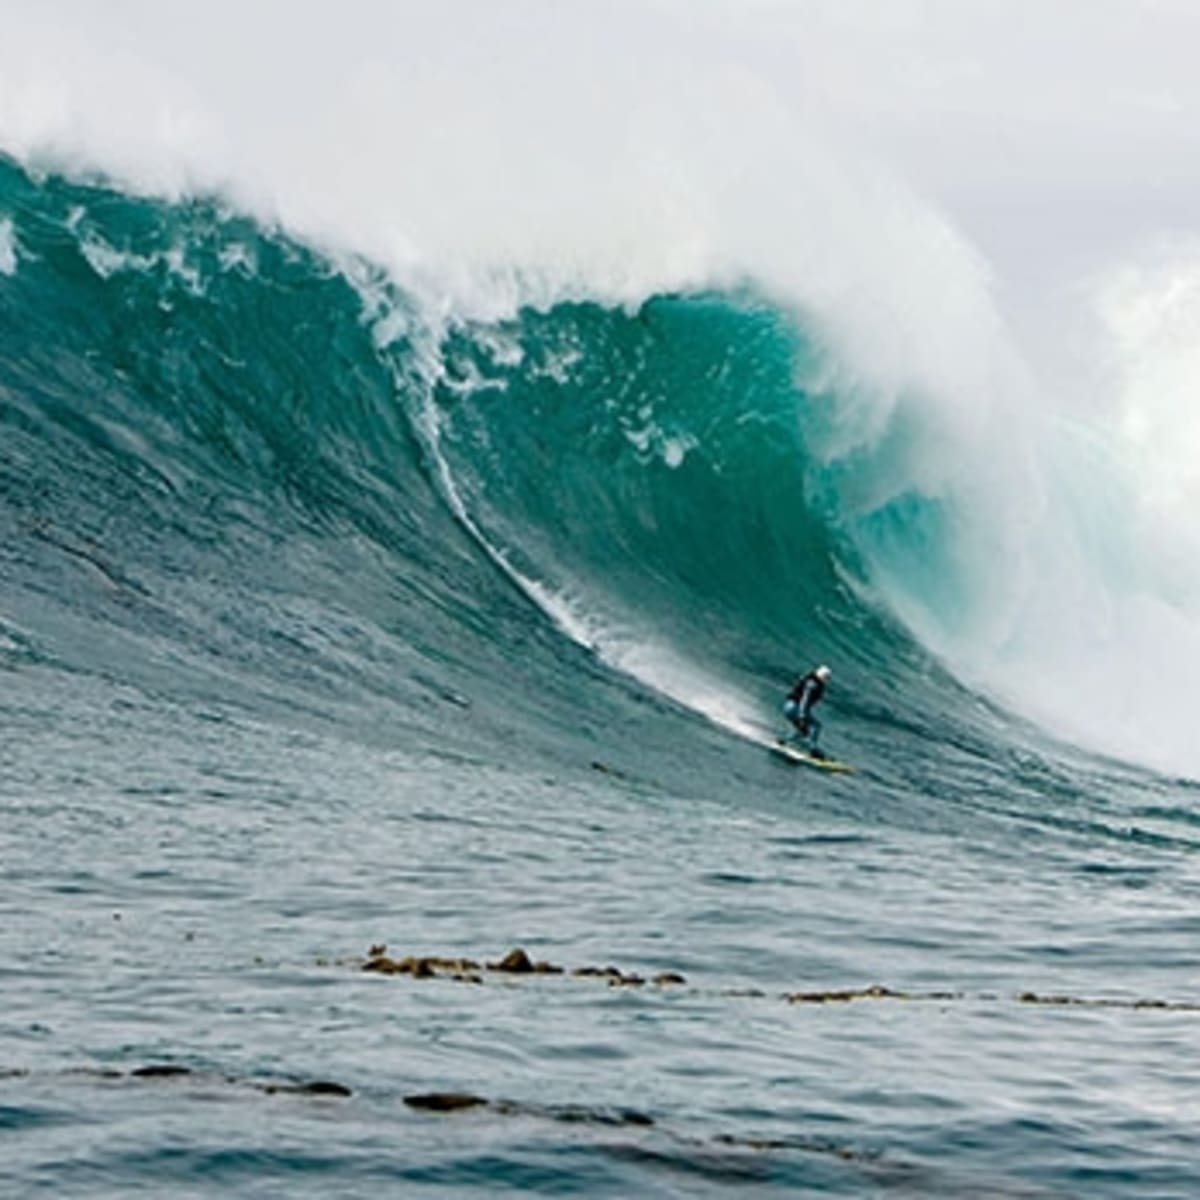 Surfers take on 'mountain' of a wave, The Right, fuelled by huge